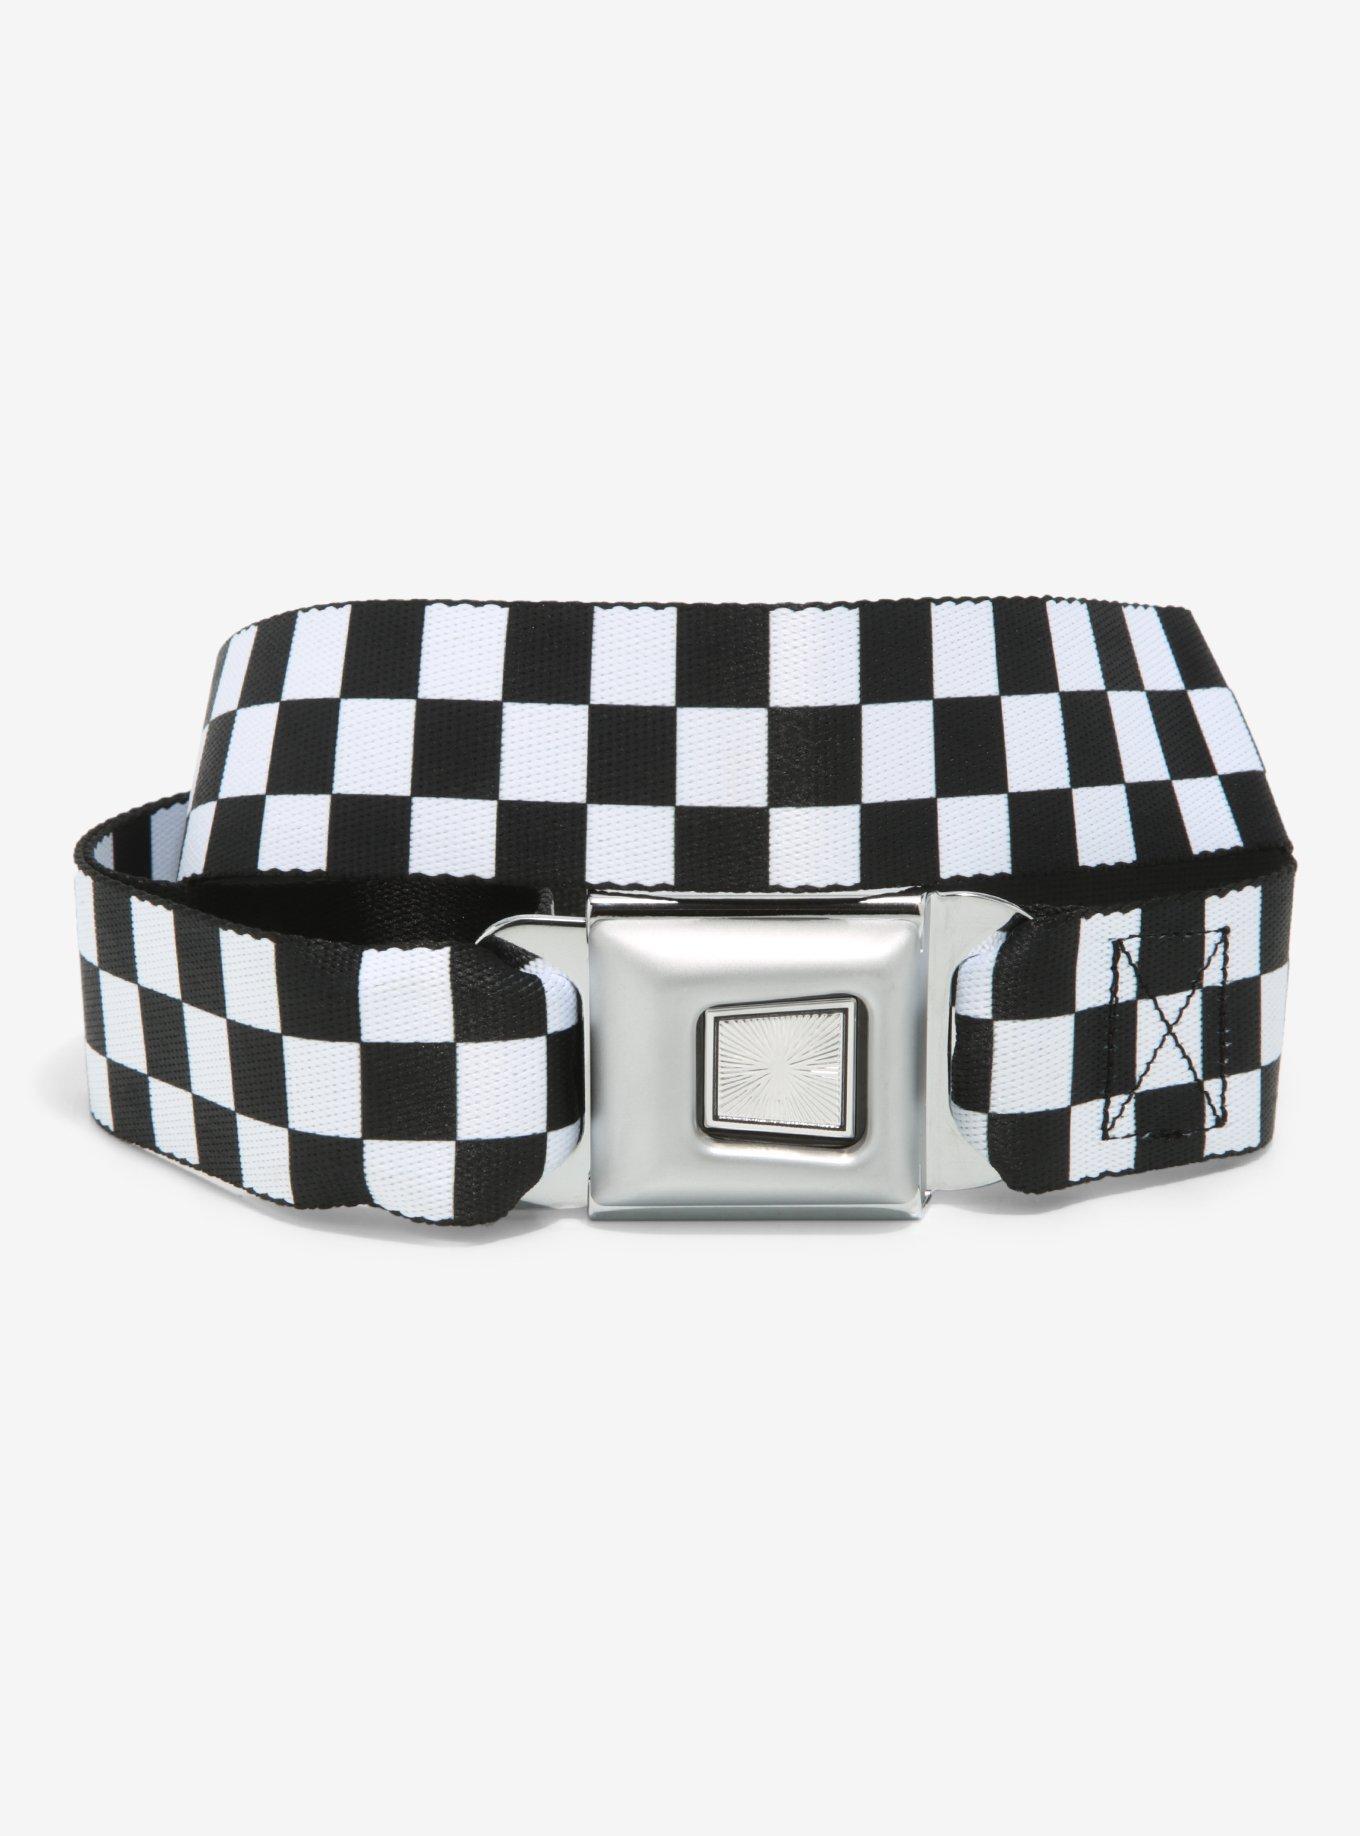  Buckle-Down Seatbelt Belt - Checker Black/Red - 1.0 Wide -  20-36 Inches in Length (BDC-W20303-1.0) : Clothing, Shoes & Jewelry